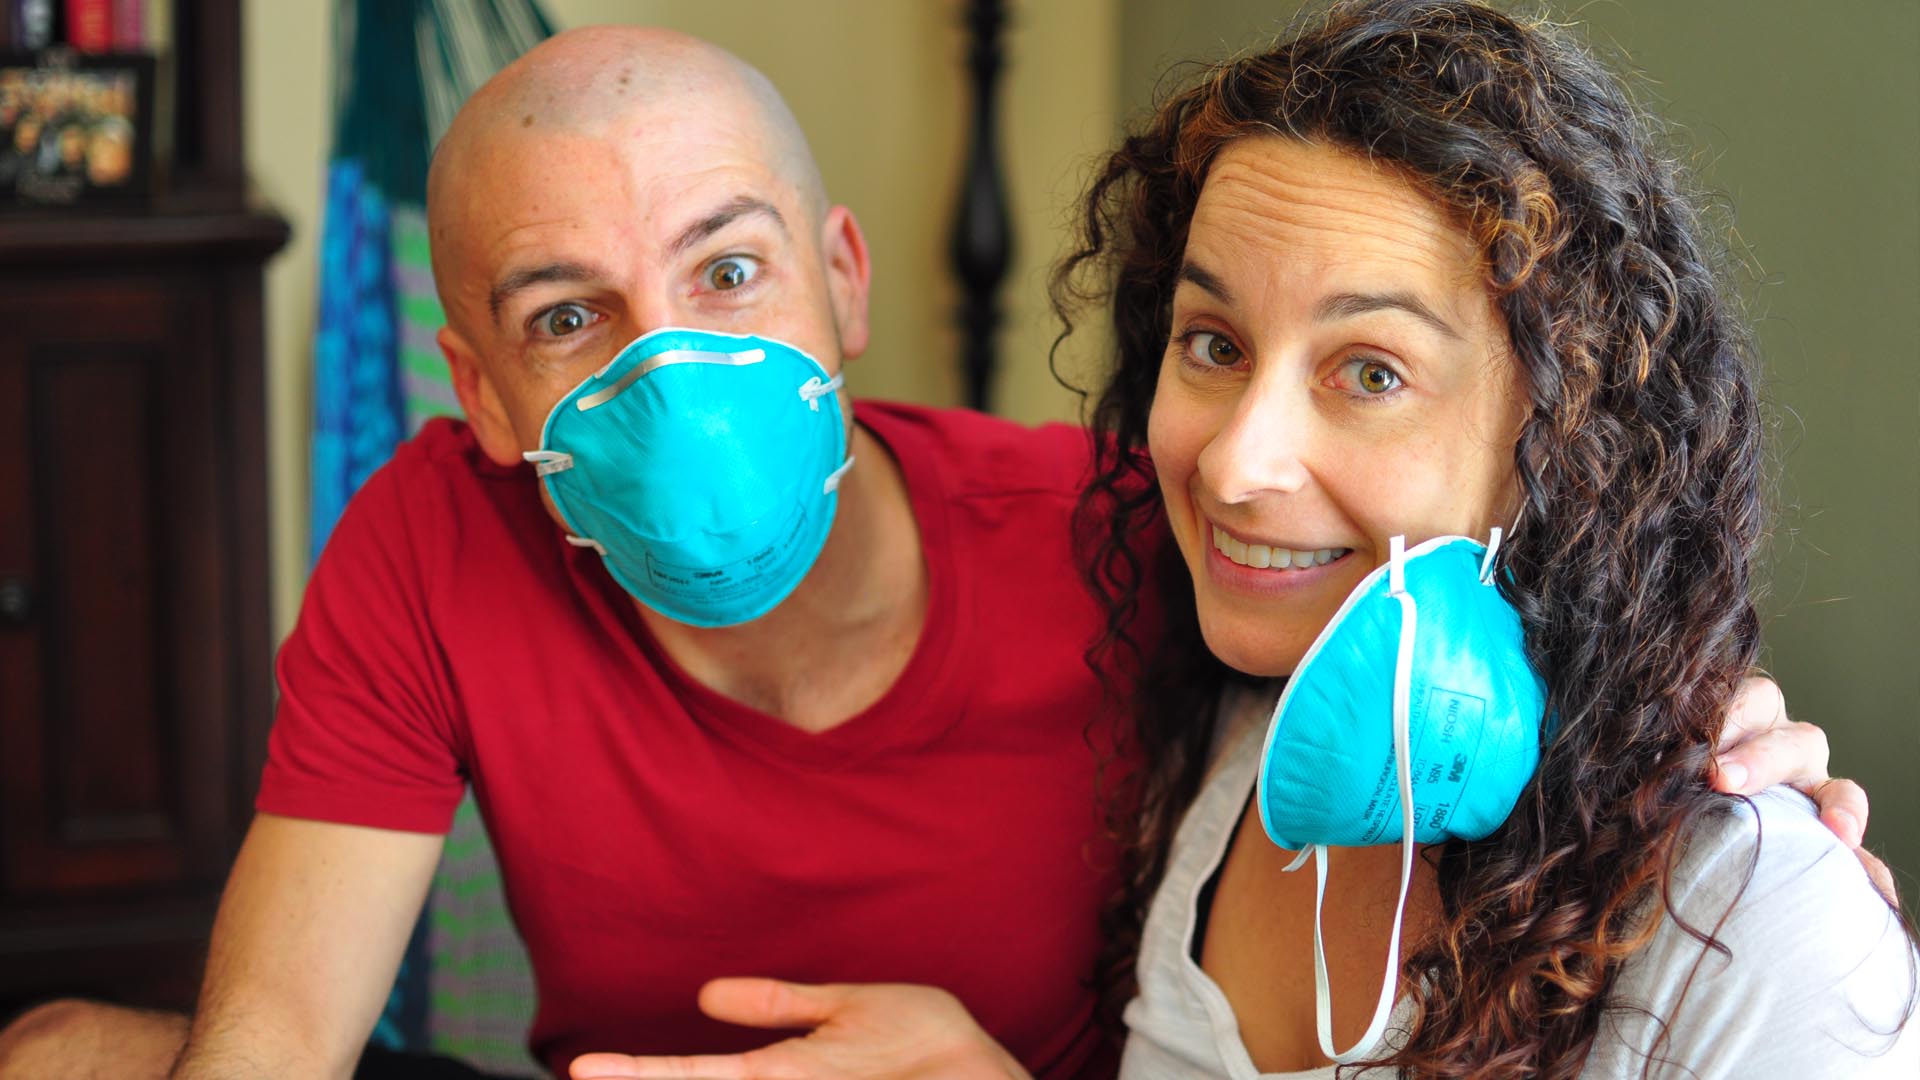 25 Fun Things to Do At Home During Quarantine (or Anytime!)